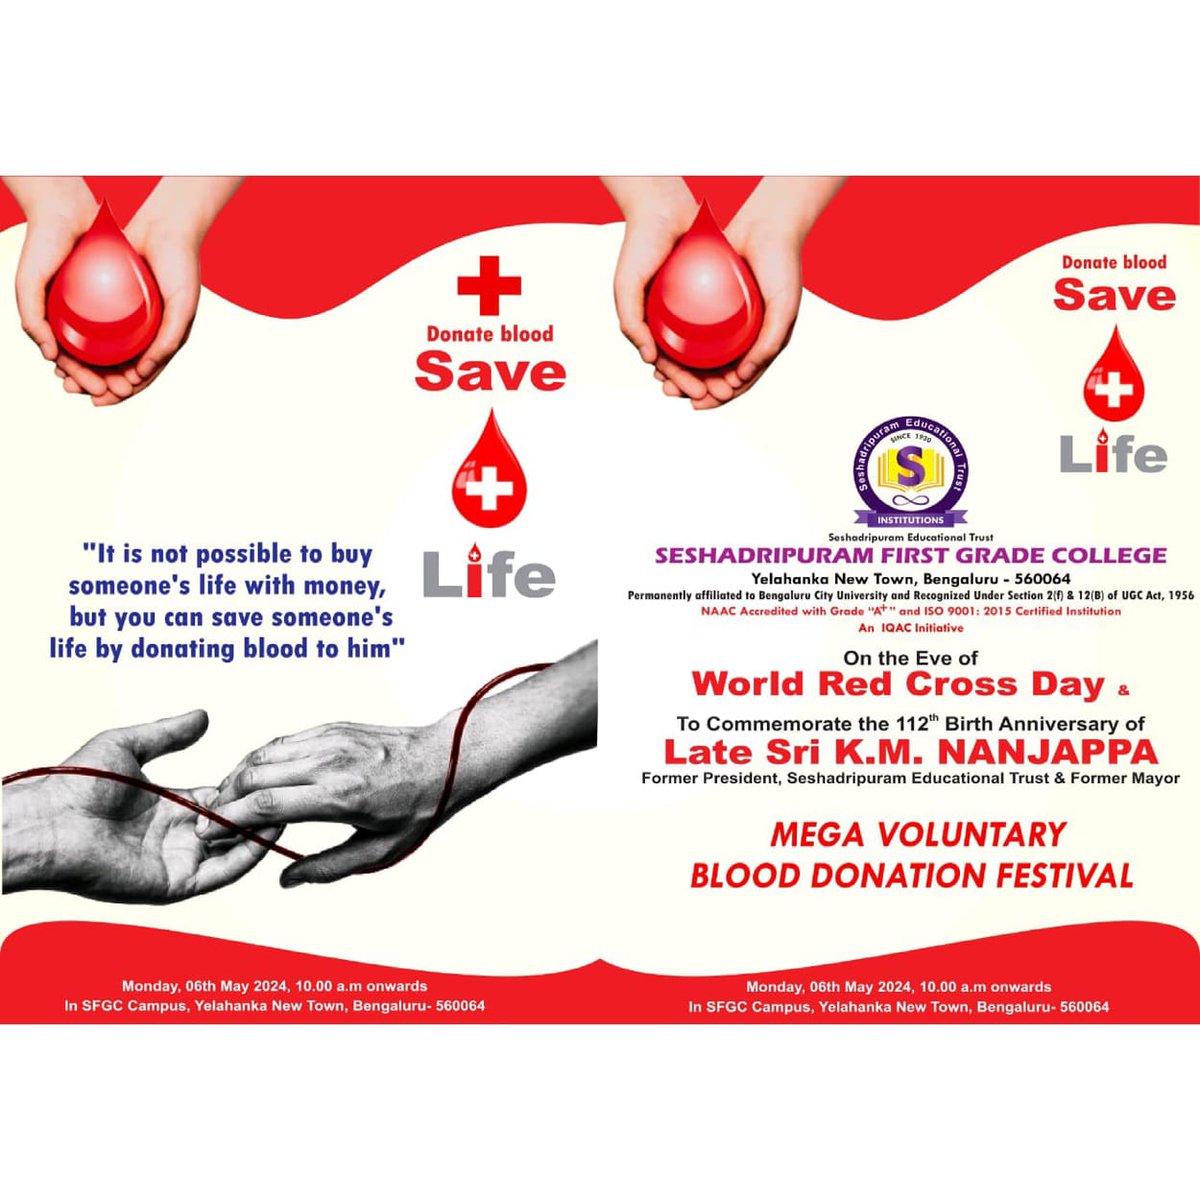 'Let's make May 6th, 2024, Monday, a day to remember as we come together to donate blood and save lives. In the midst of our busy lives, let's pause to make a difference, to extend a hand of hope, and to embody the true spirit of humanity. @NSSIndia @nssrdbangalore @KarnatakaNss